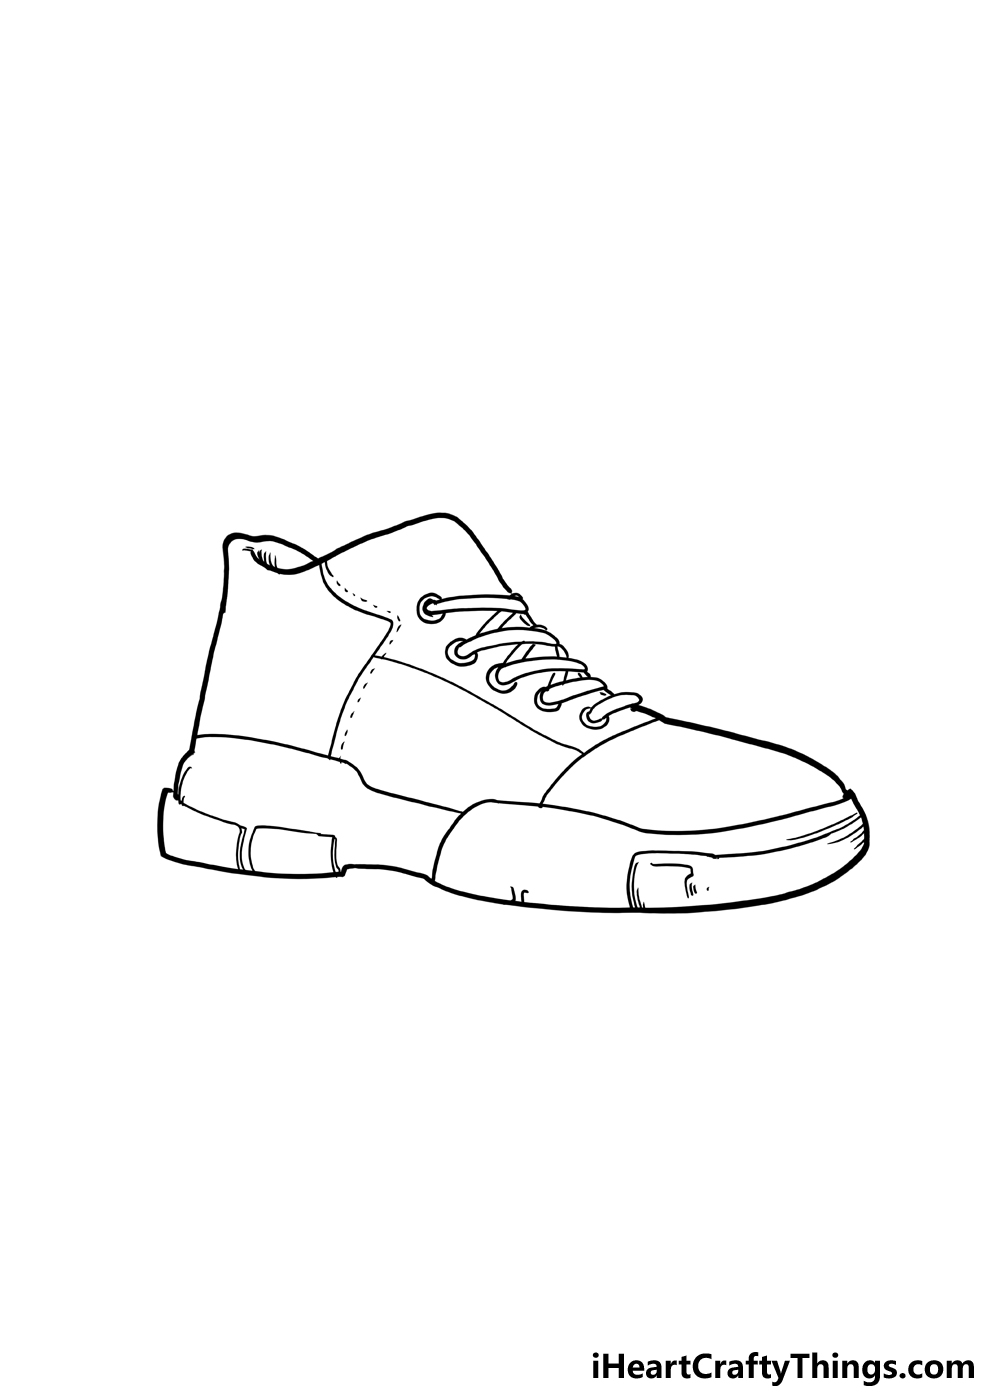 How to Draw A Shoe step 5